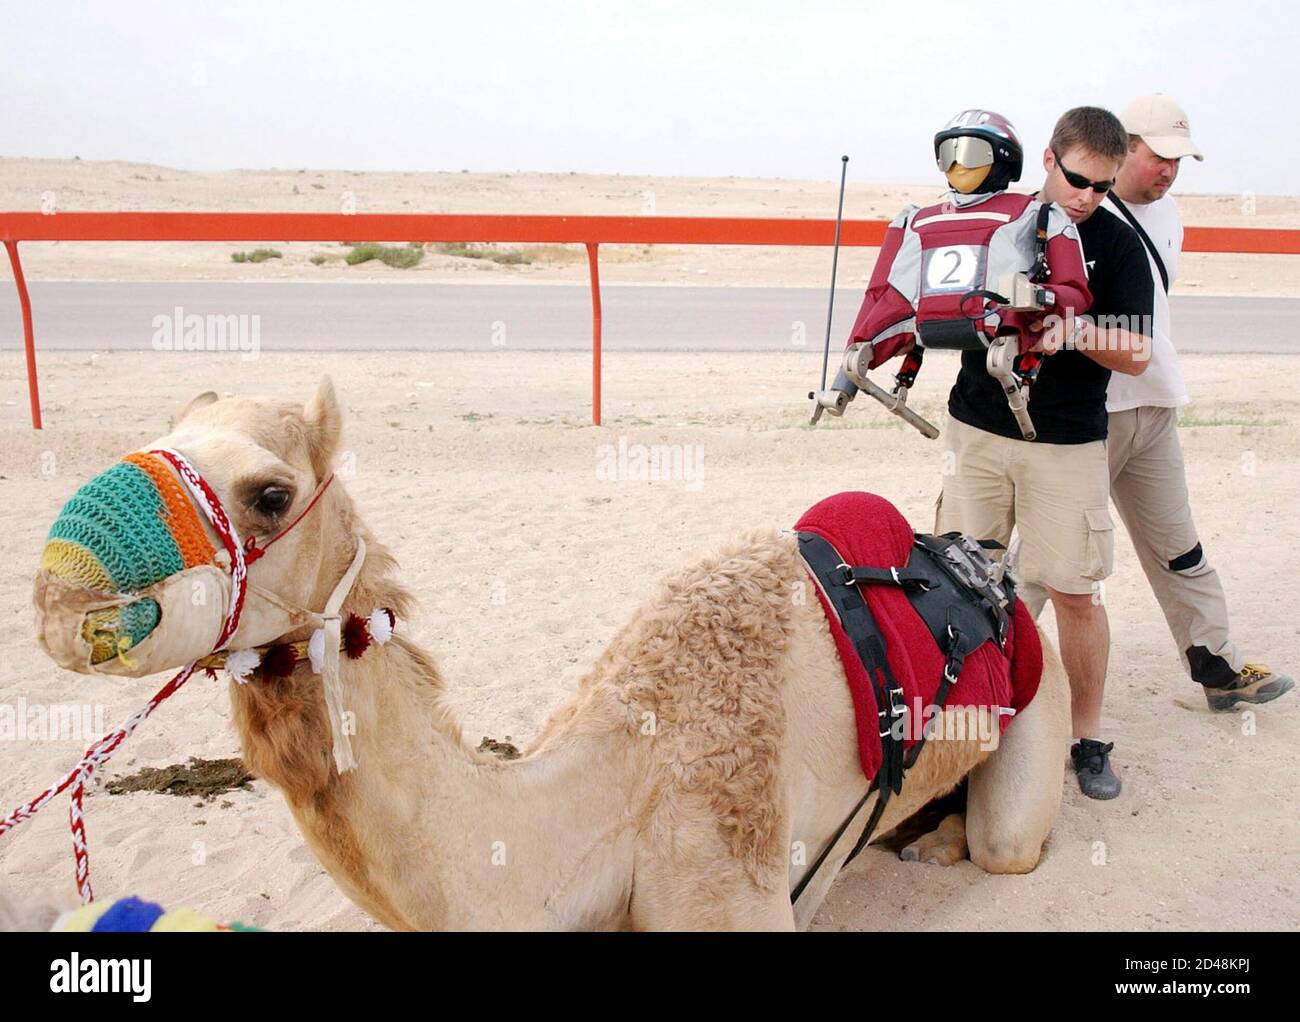 A robot jockey gets placed on a camel during a trial session at the  Shahaniah camel race track in Doha on April 19, 2005. Qatar banned the use  of children in camel